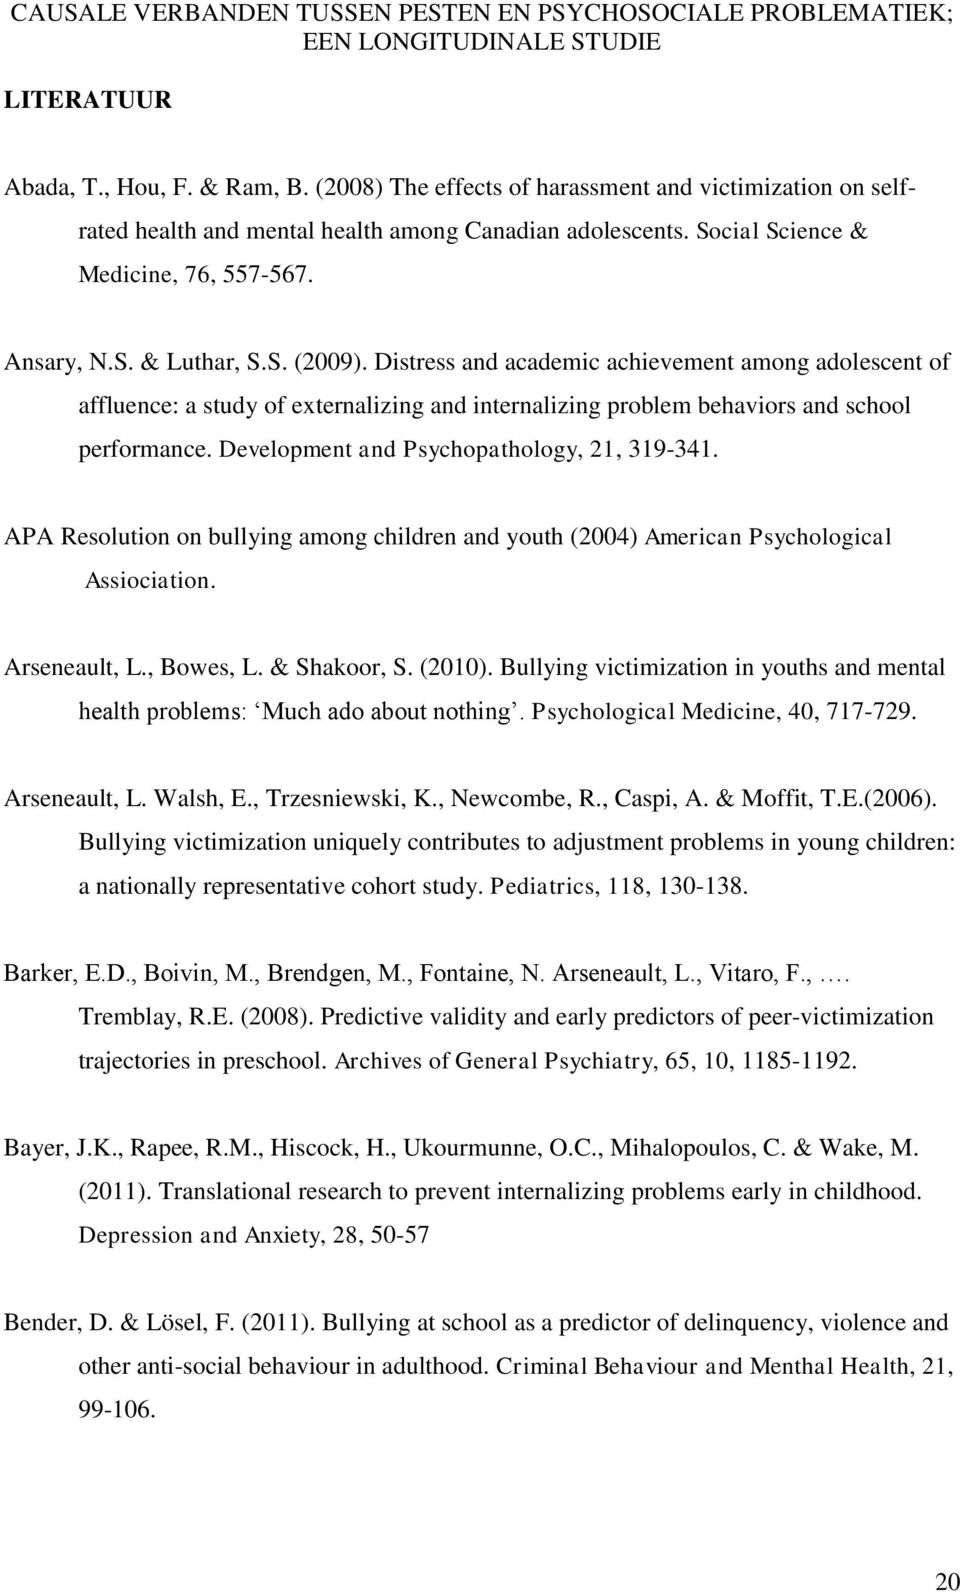 Development and Psychopathology, 21, 319-341. APA Resolution on bullying among children and youth (2004) American Psychological Assiociation. Arseneault, L., Bowes, L. & Shakoor, S. (2010).